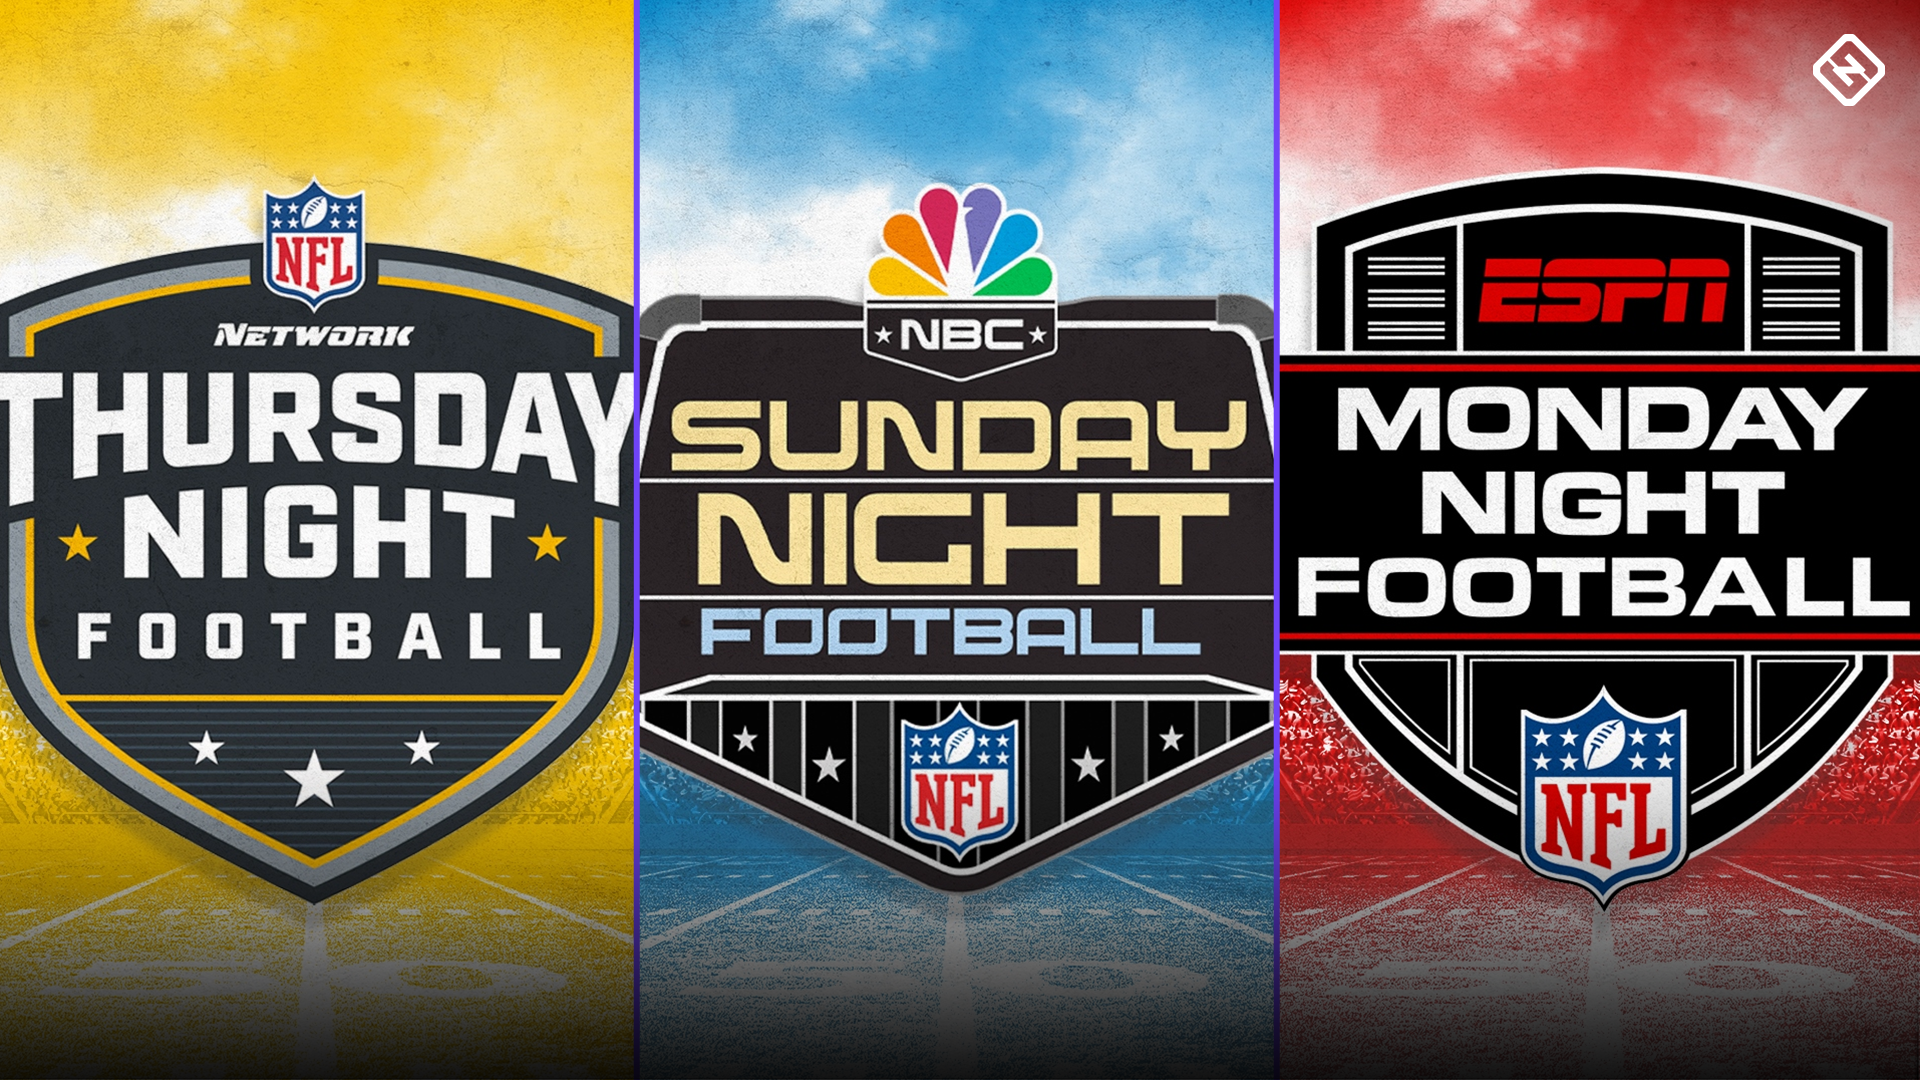 what is the sunday night football game tonight